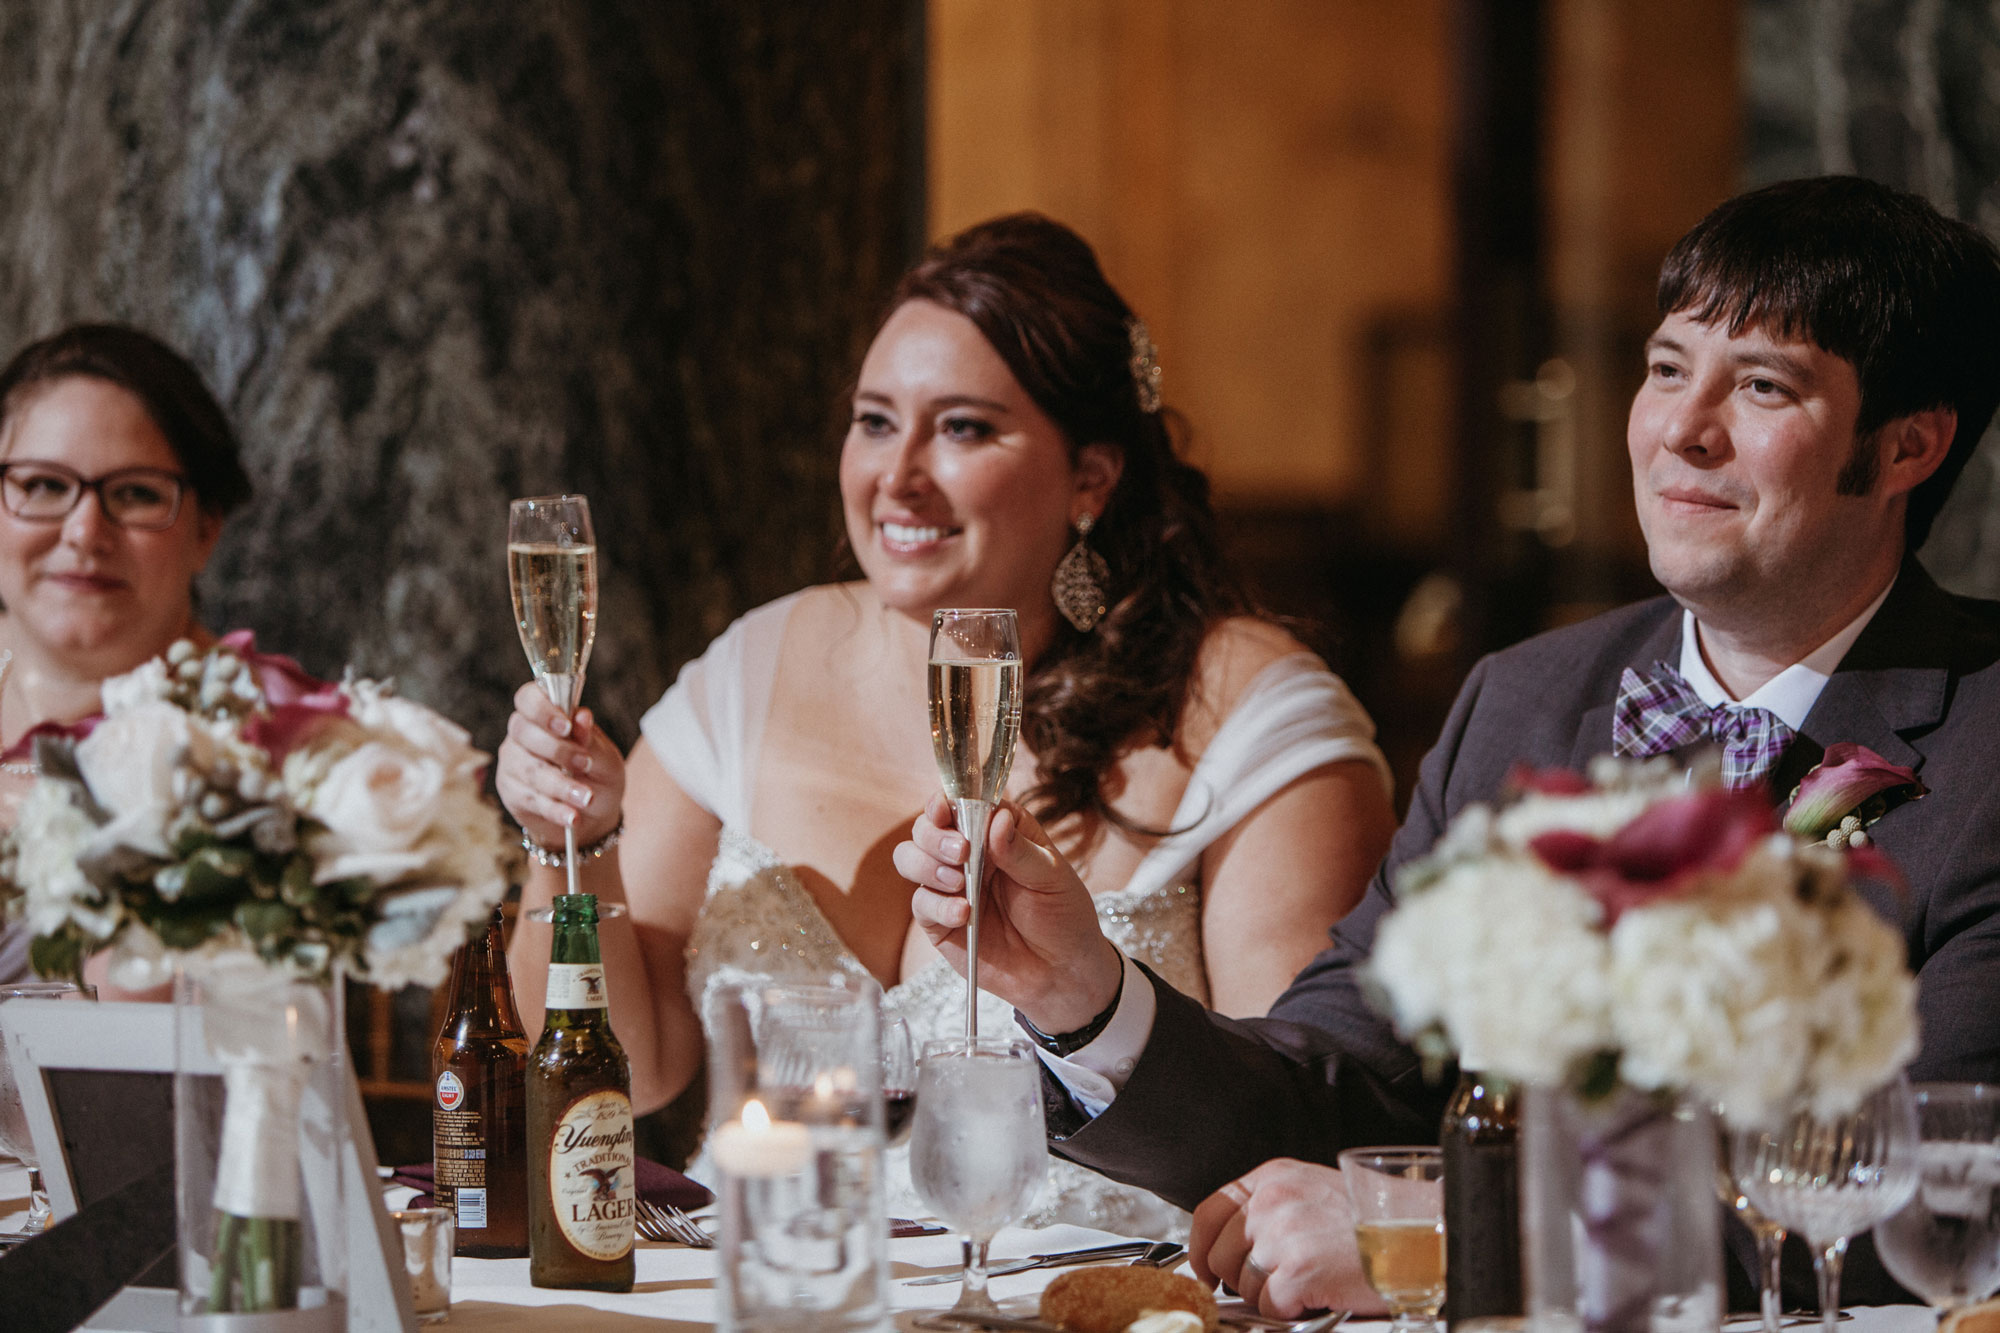 Bridal Party's Reaction to a toast during the reception